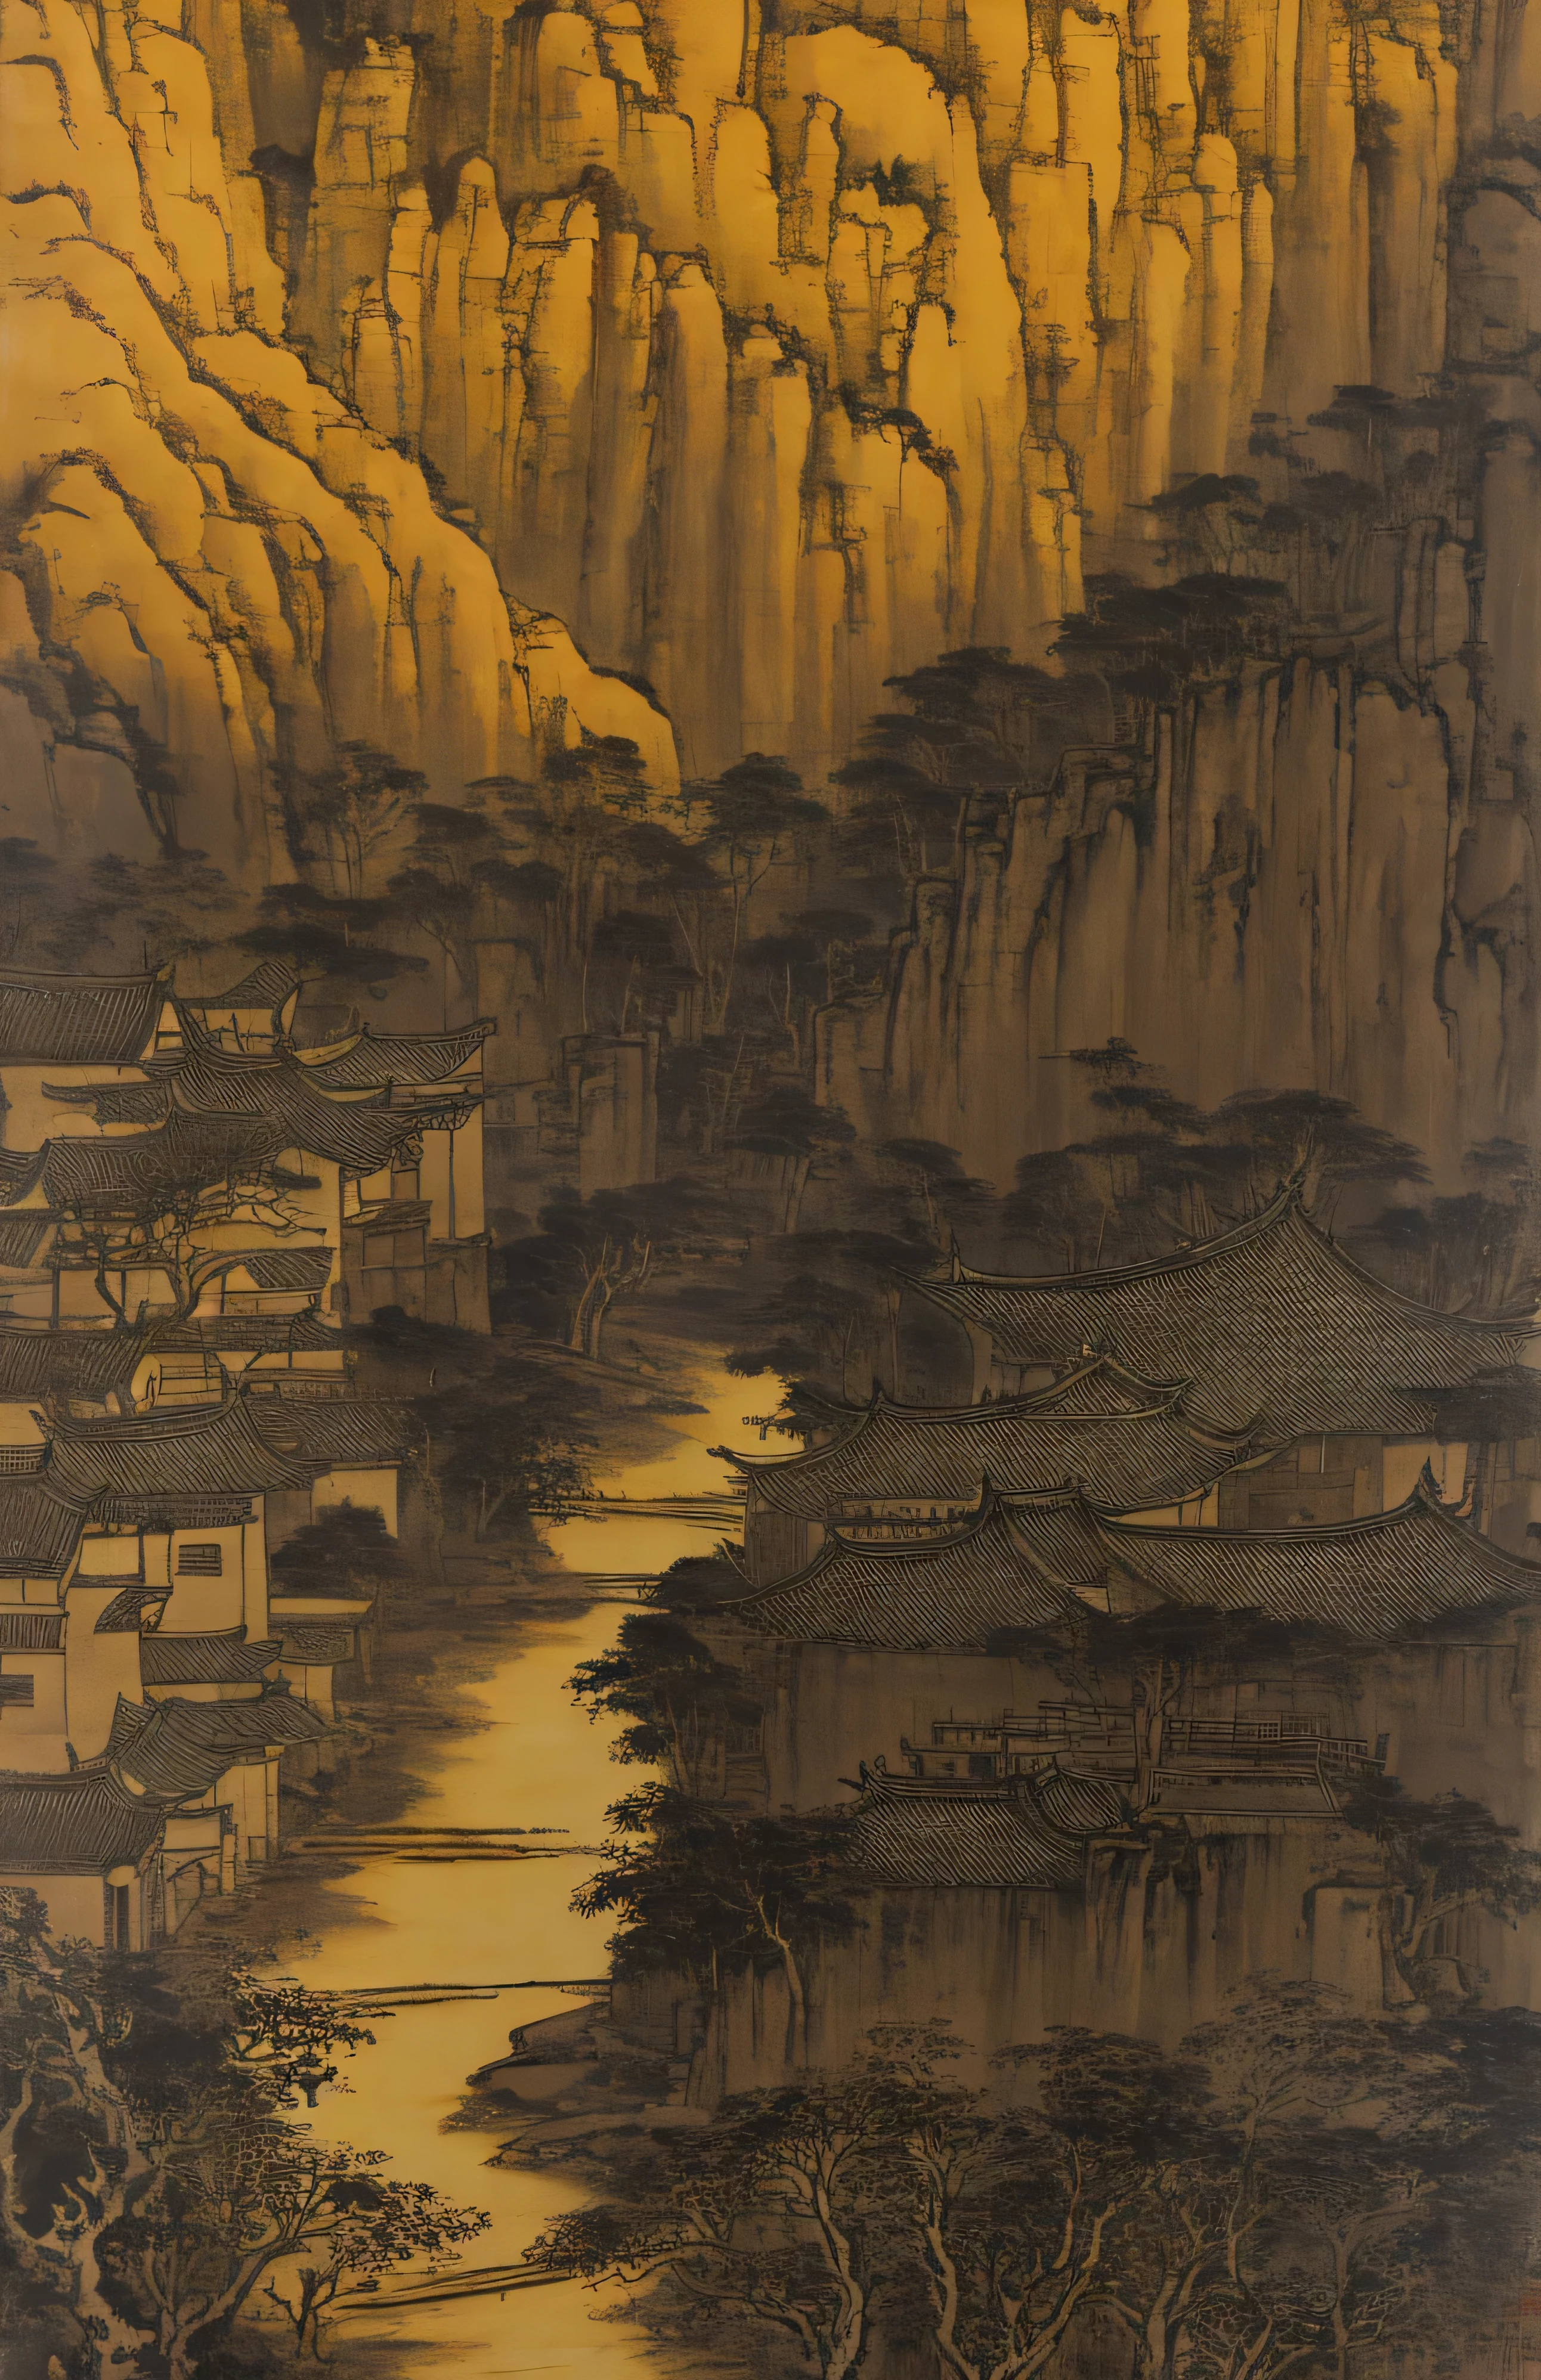 Small village overlooking the creek, The style is influenced by ancient Chinese art, light yellow and light black, Chinese painting, ink painting, Bada Shanren, Xu Wei, Shi Tao, organic architecture, Hiking, earthy naturalism